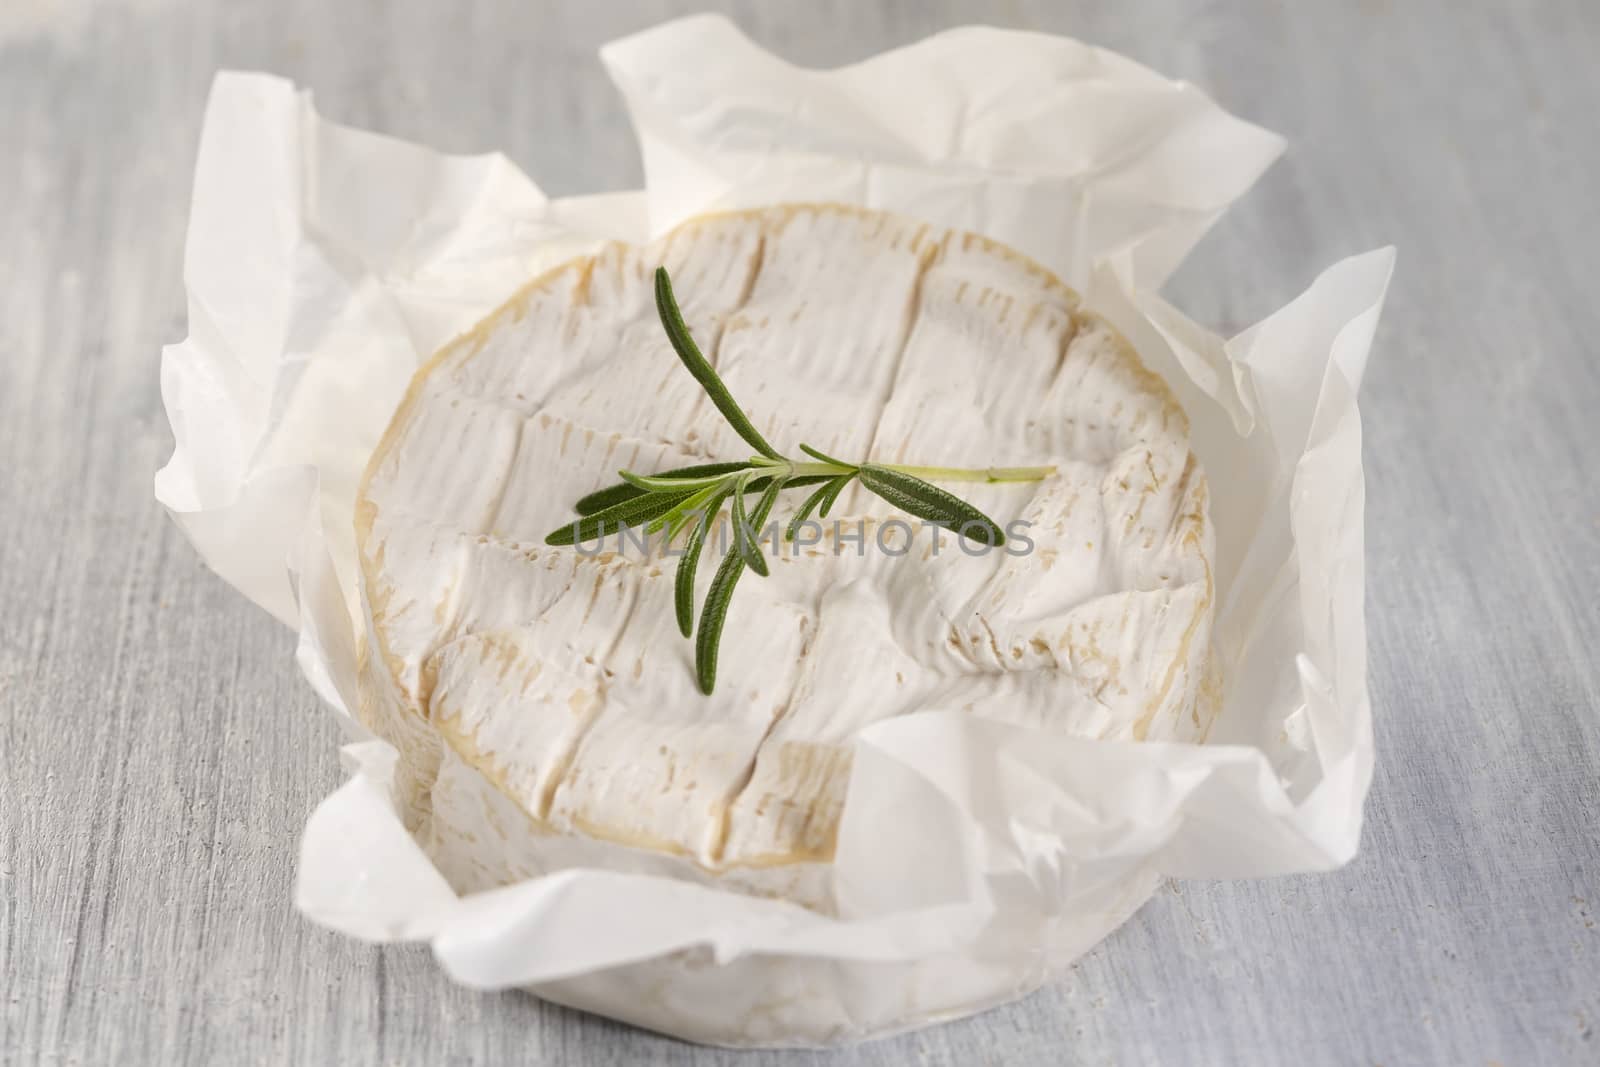 Traditional French Normandy cheese Camembert by JPC-PROD